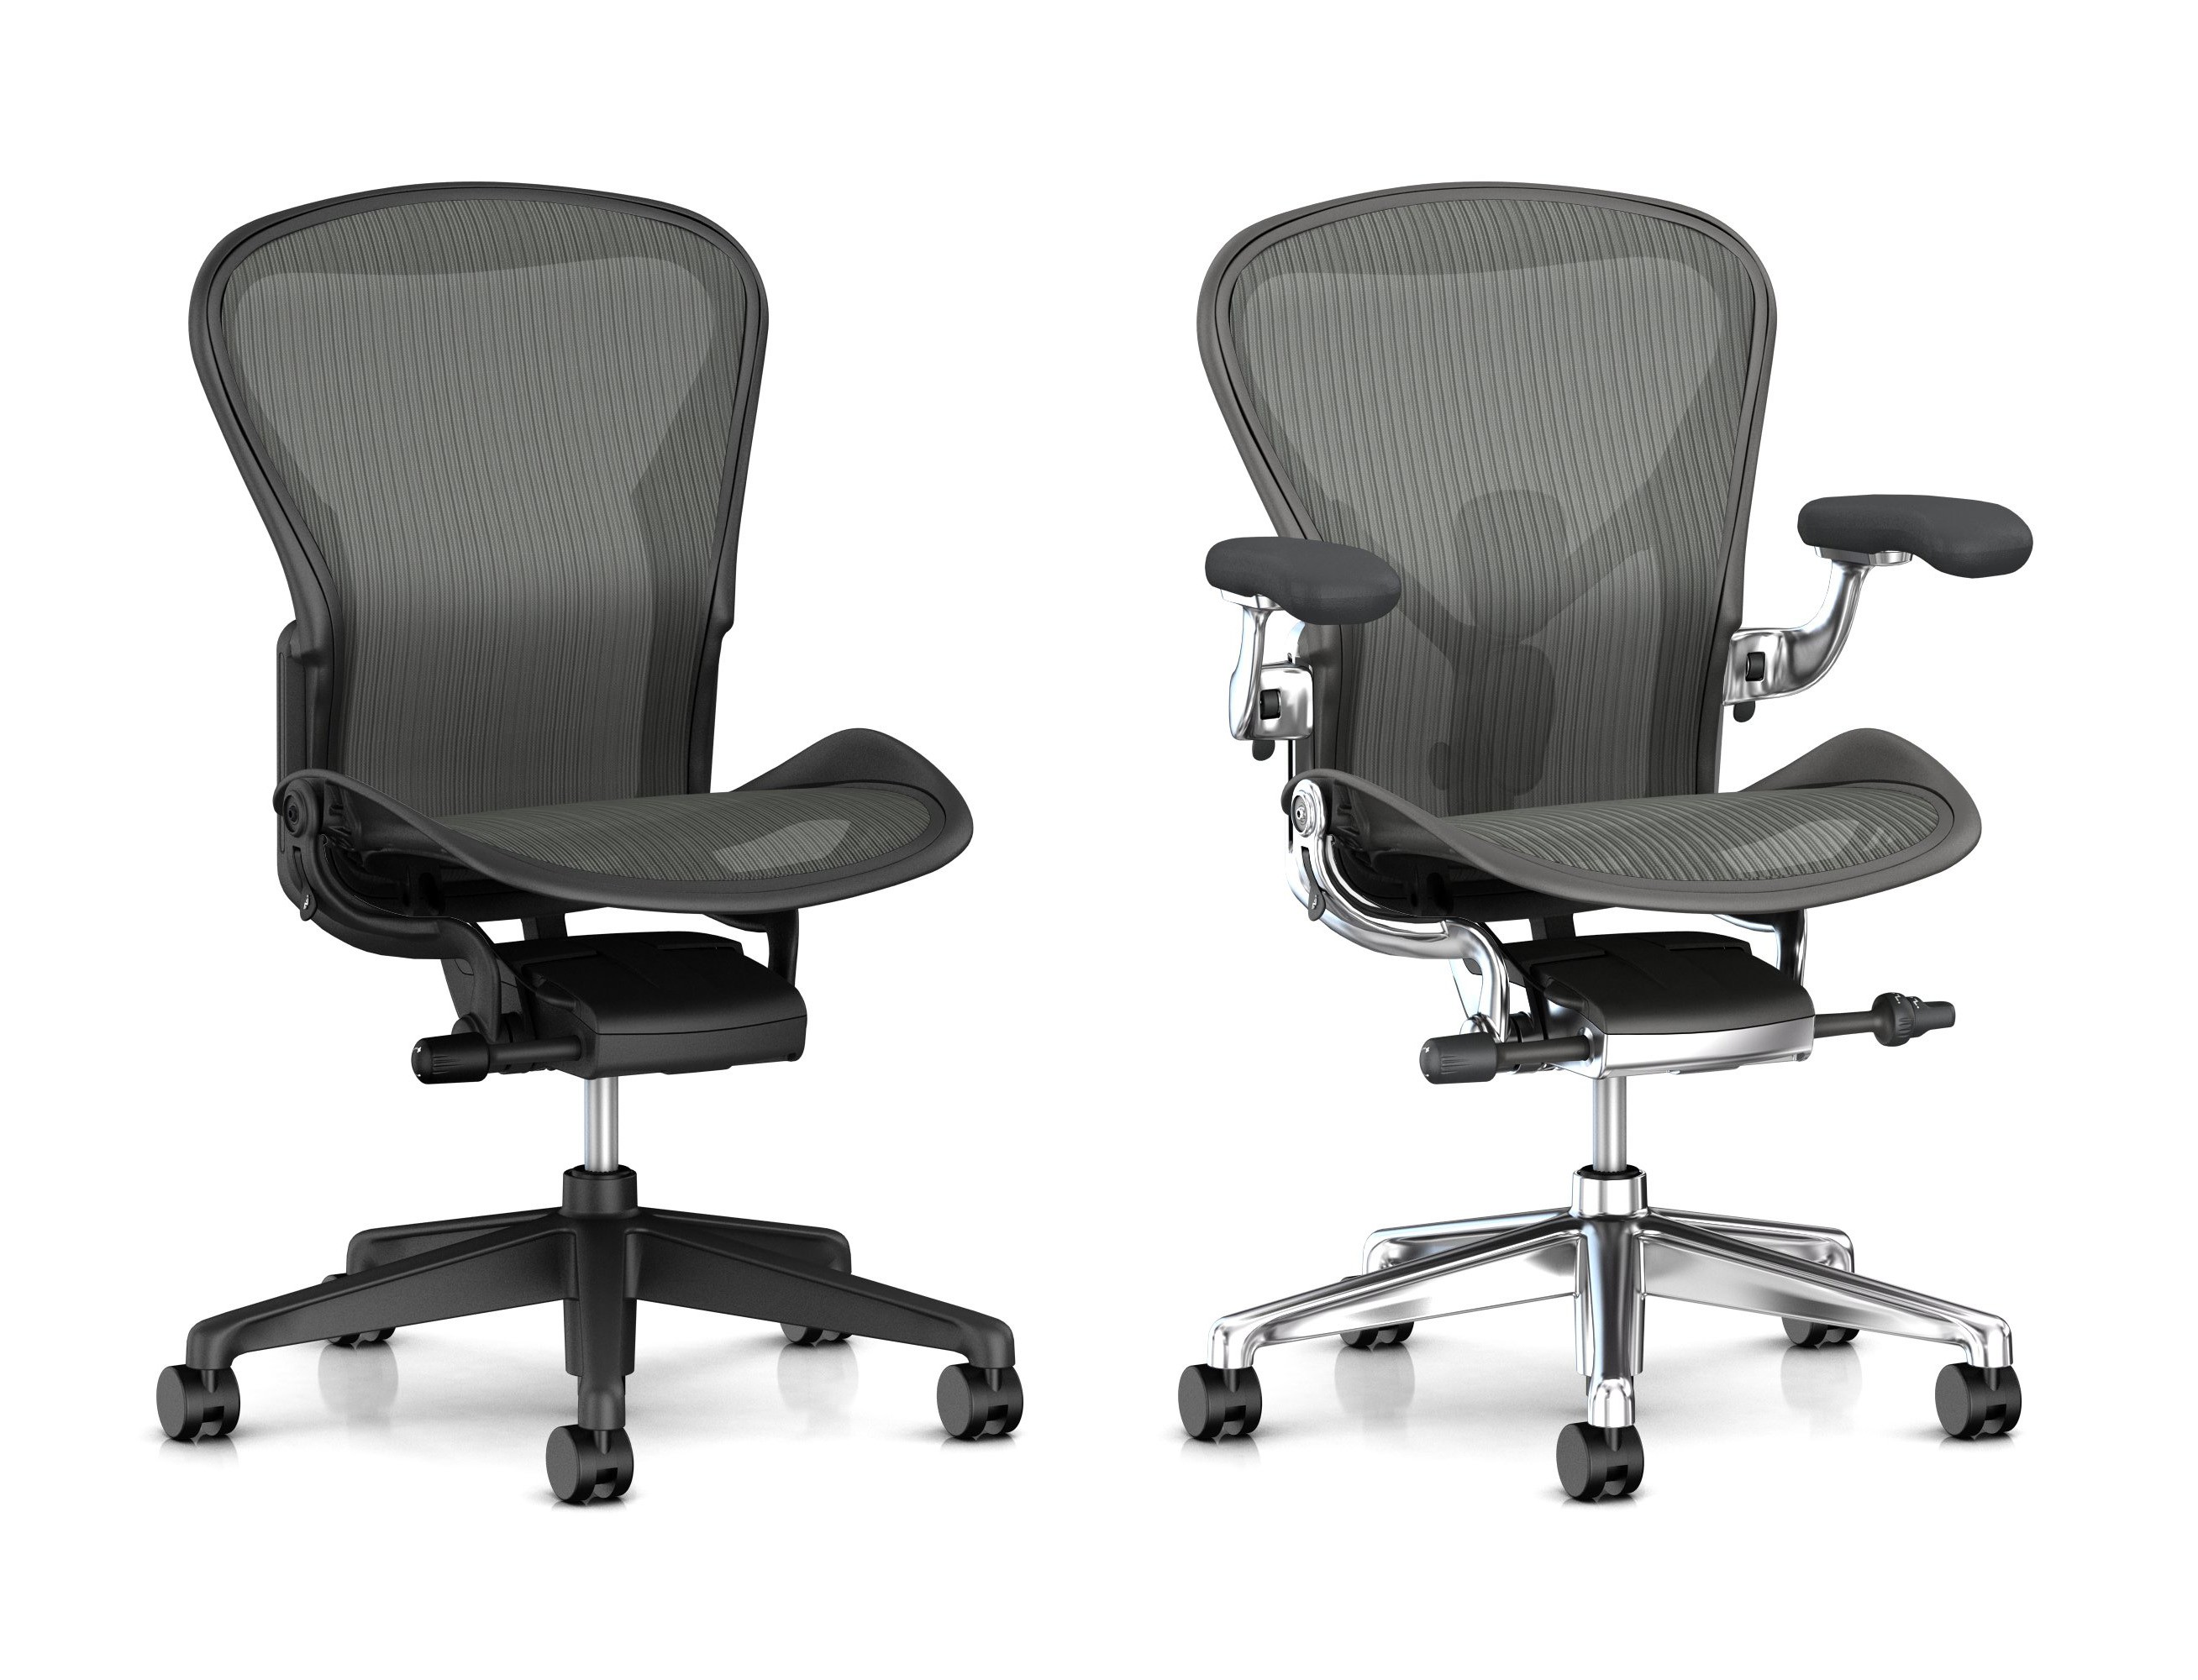 Which Chair Is Best For You With Armrests Or Without Them? | Office Chairs